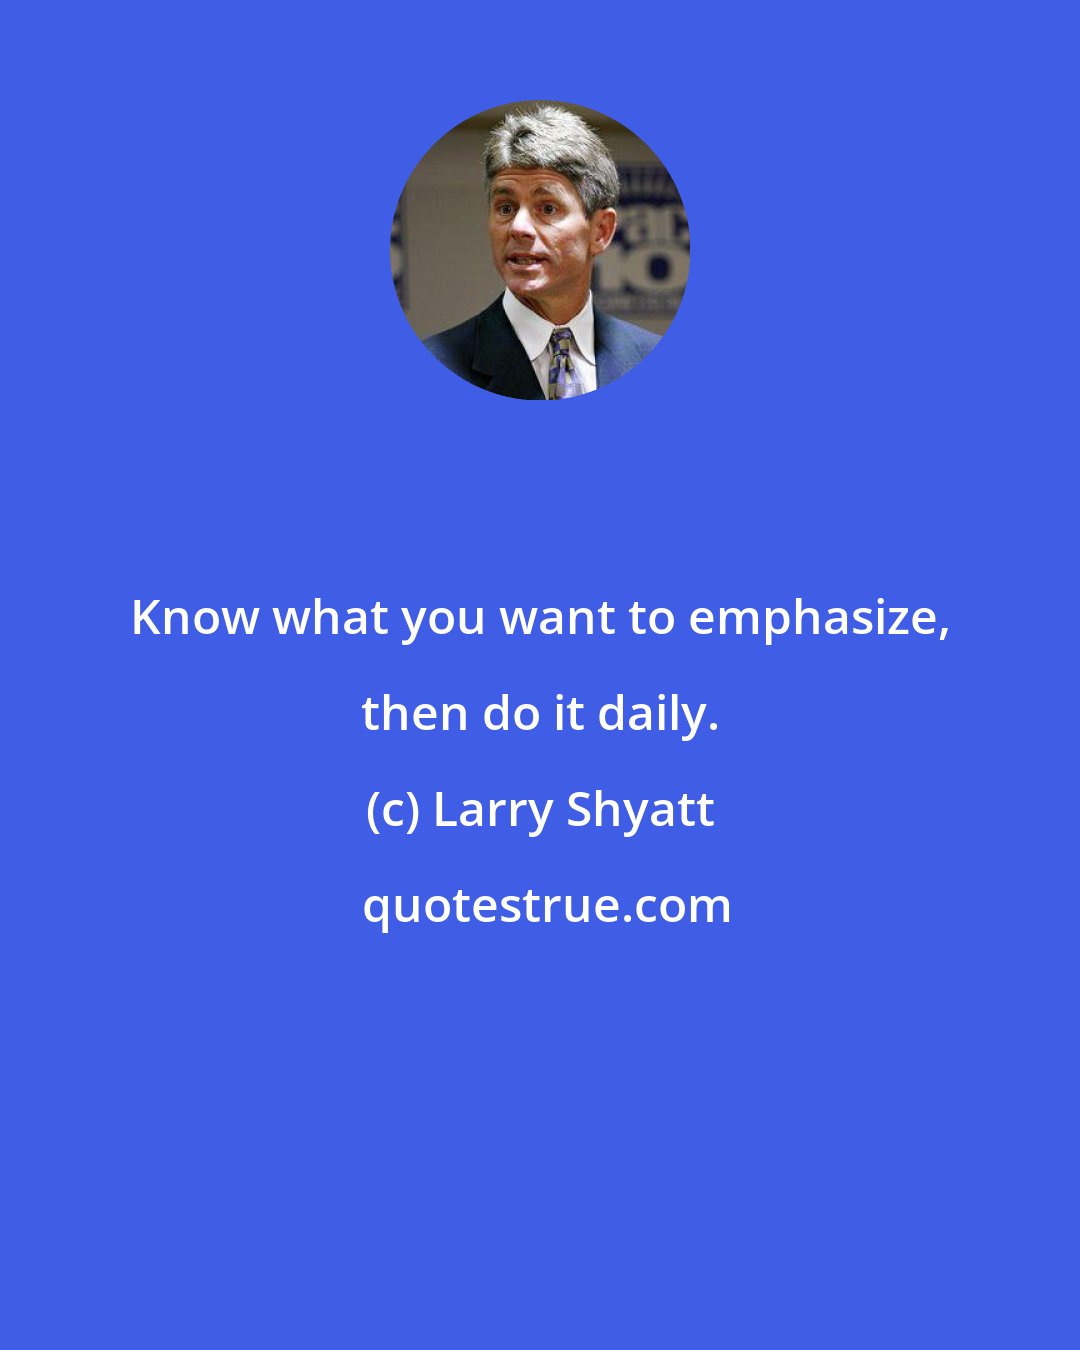 Larry Shyatt: Know what you want to emphasize, then do it daily.